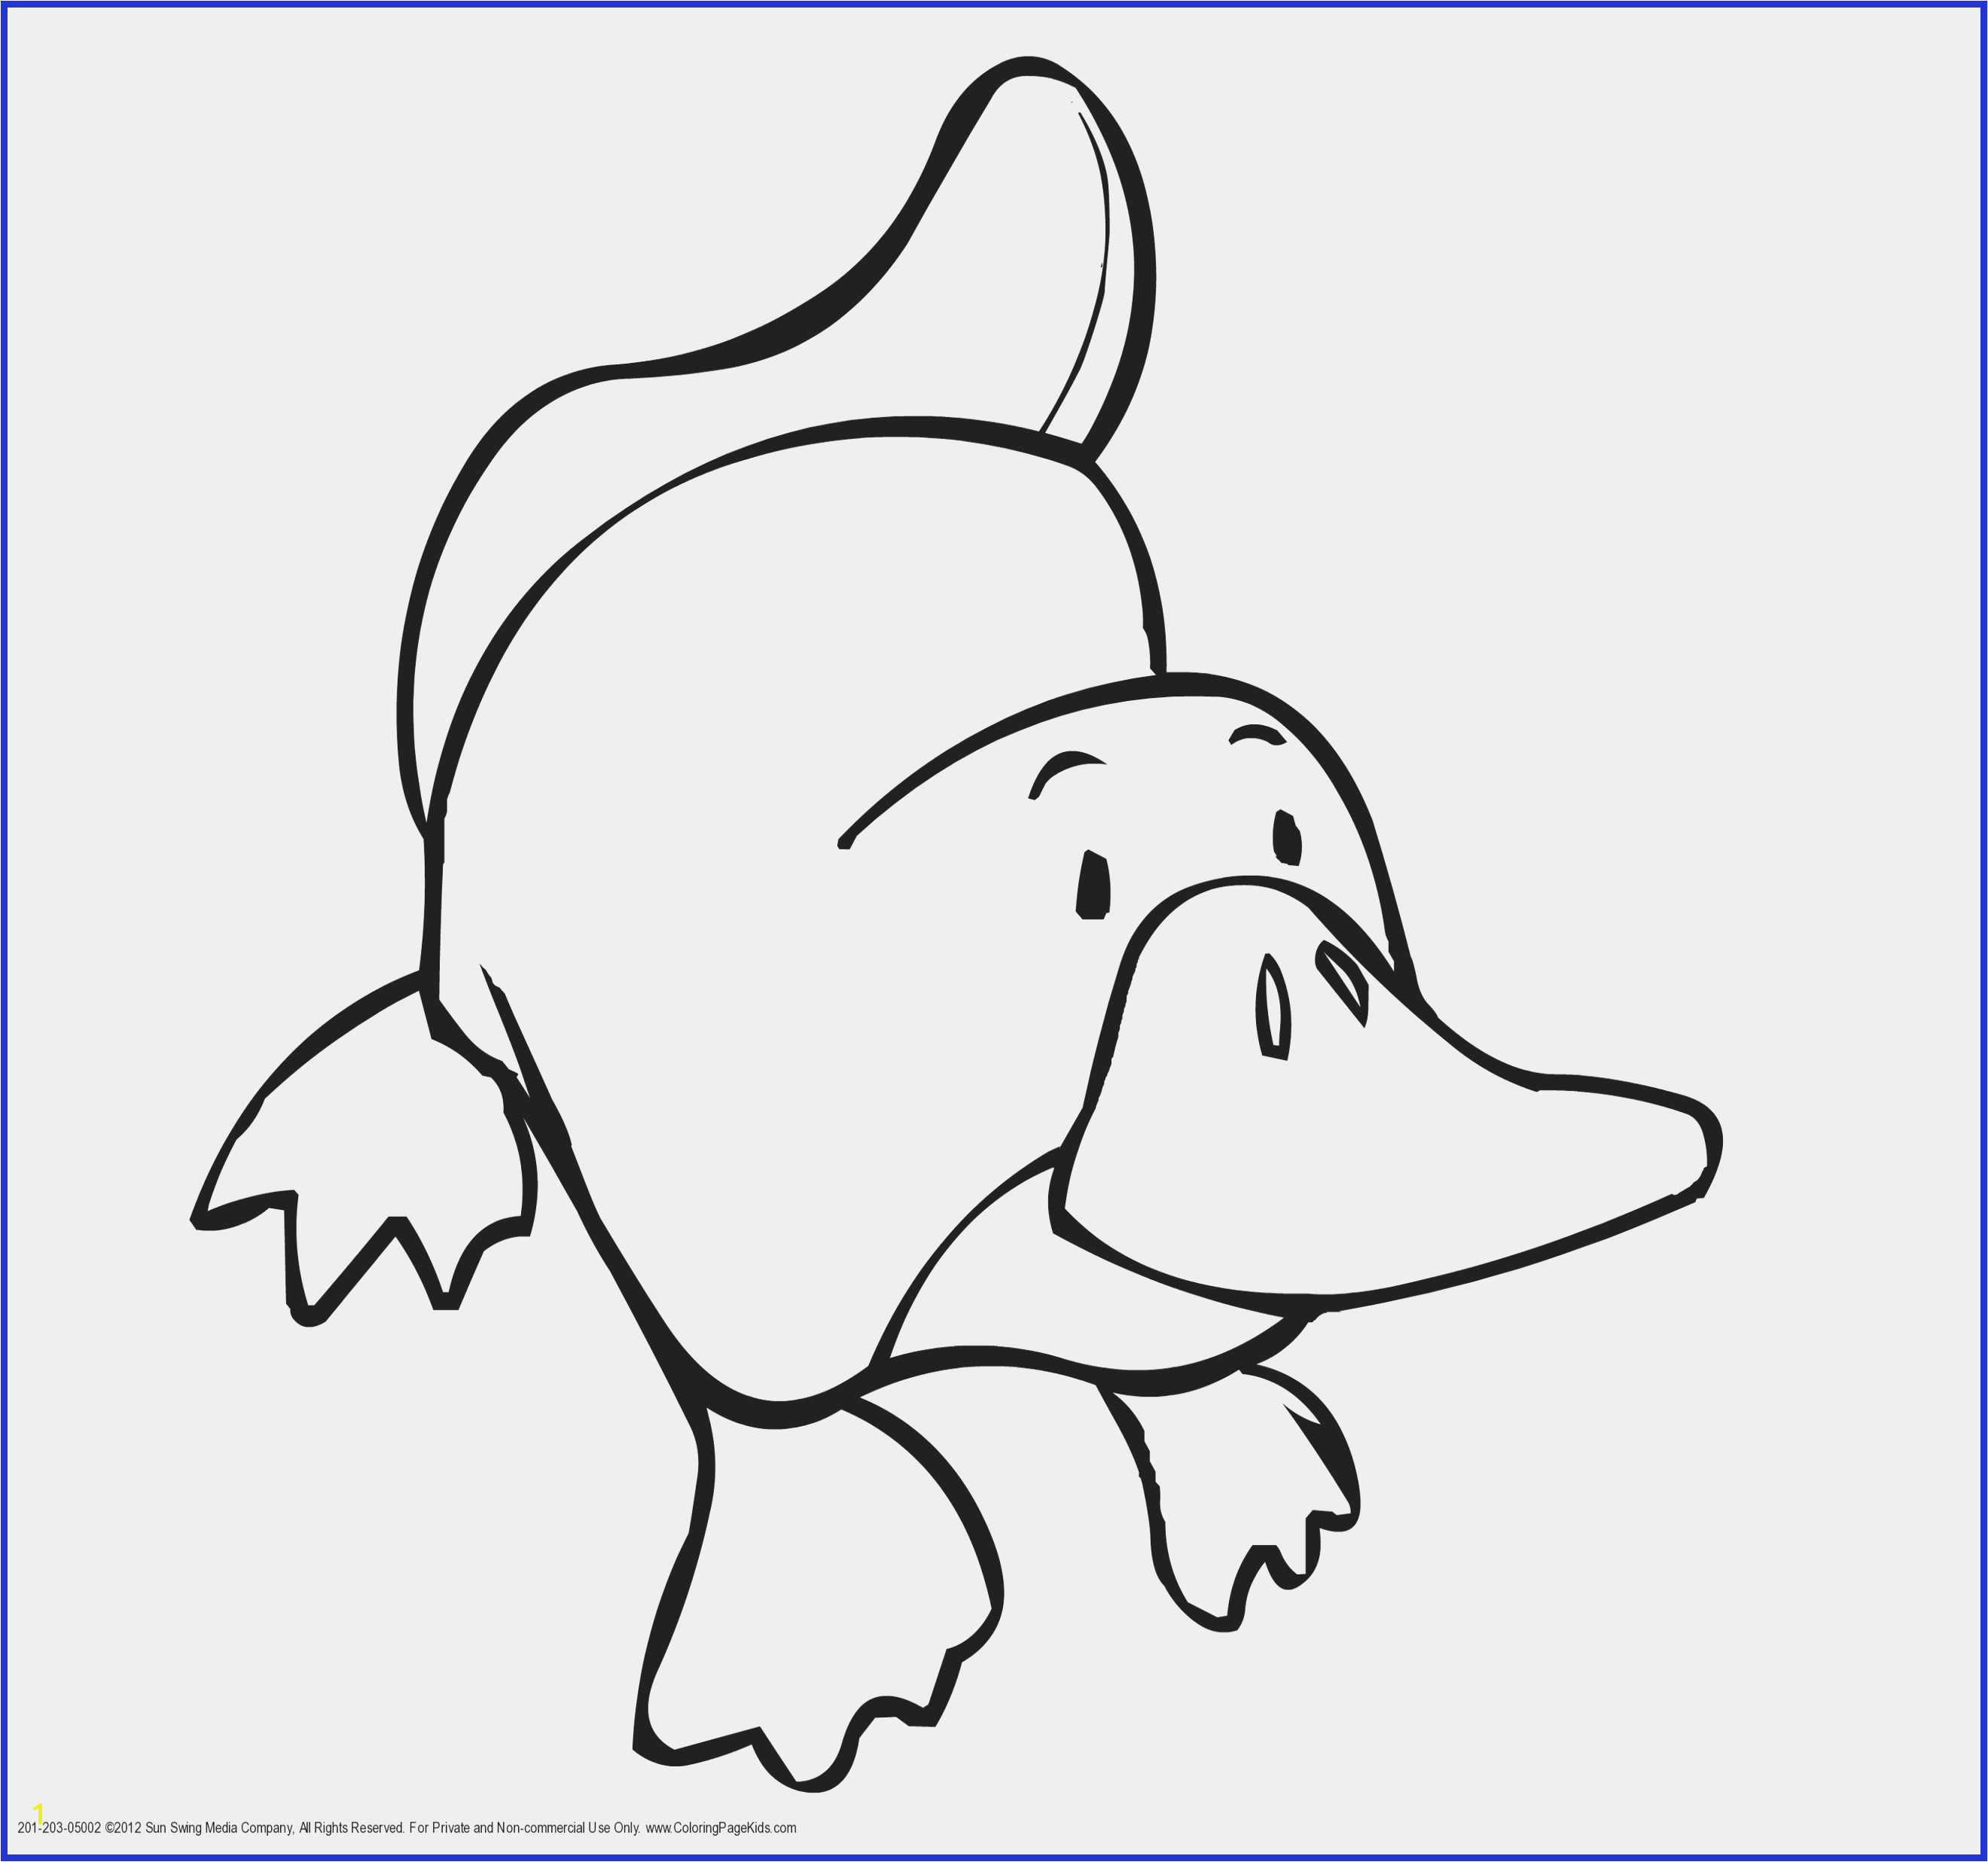 Air Pollution Coloring Pages Inspirational Information About Animals – Endangered Species and